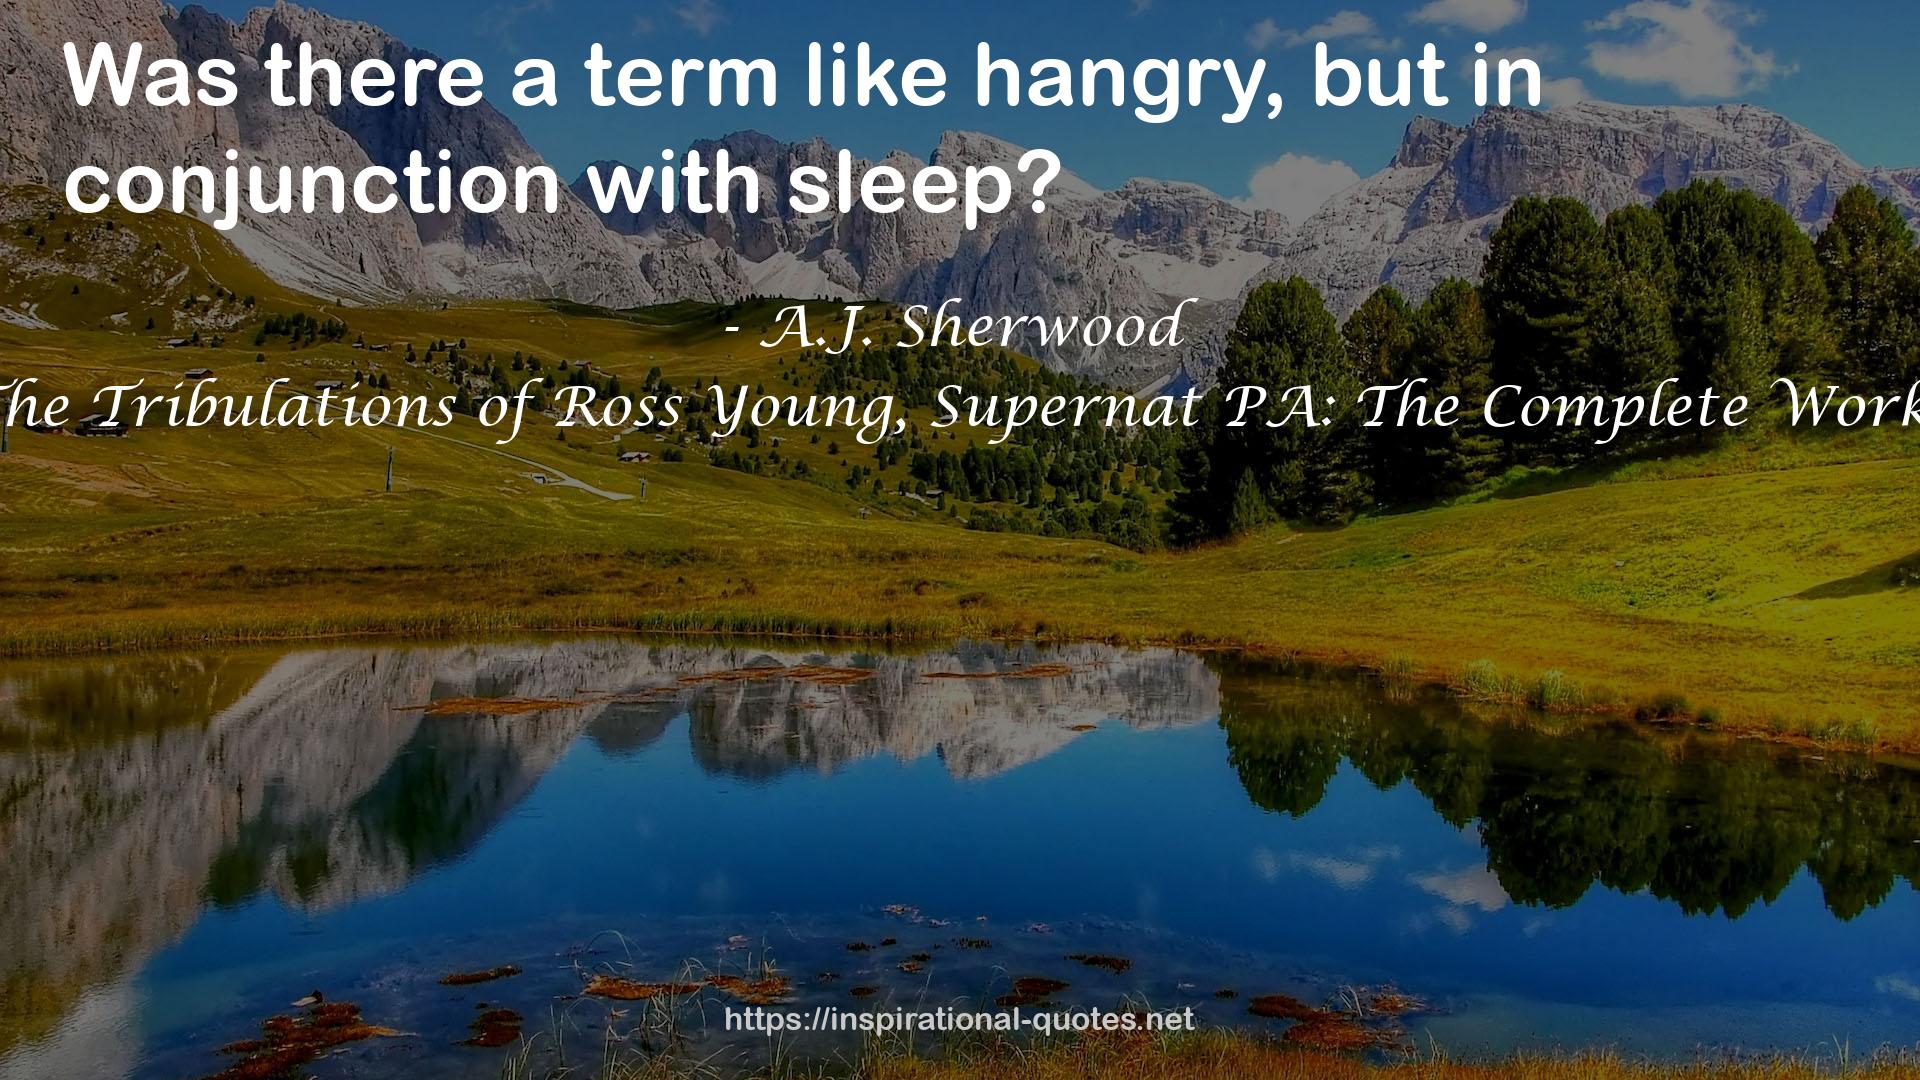 The Tribulations of Ross Young, Supernat PA: The Complete Works QUOTES